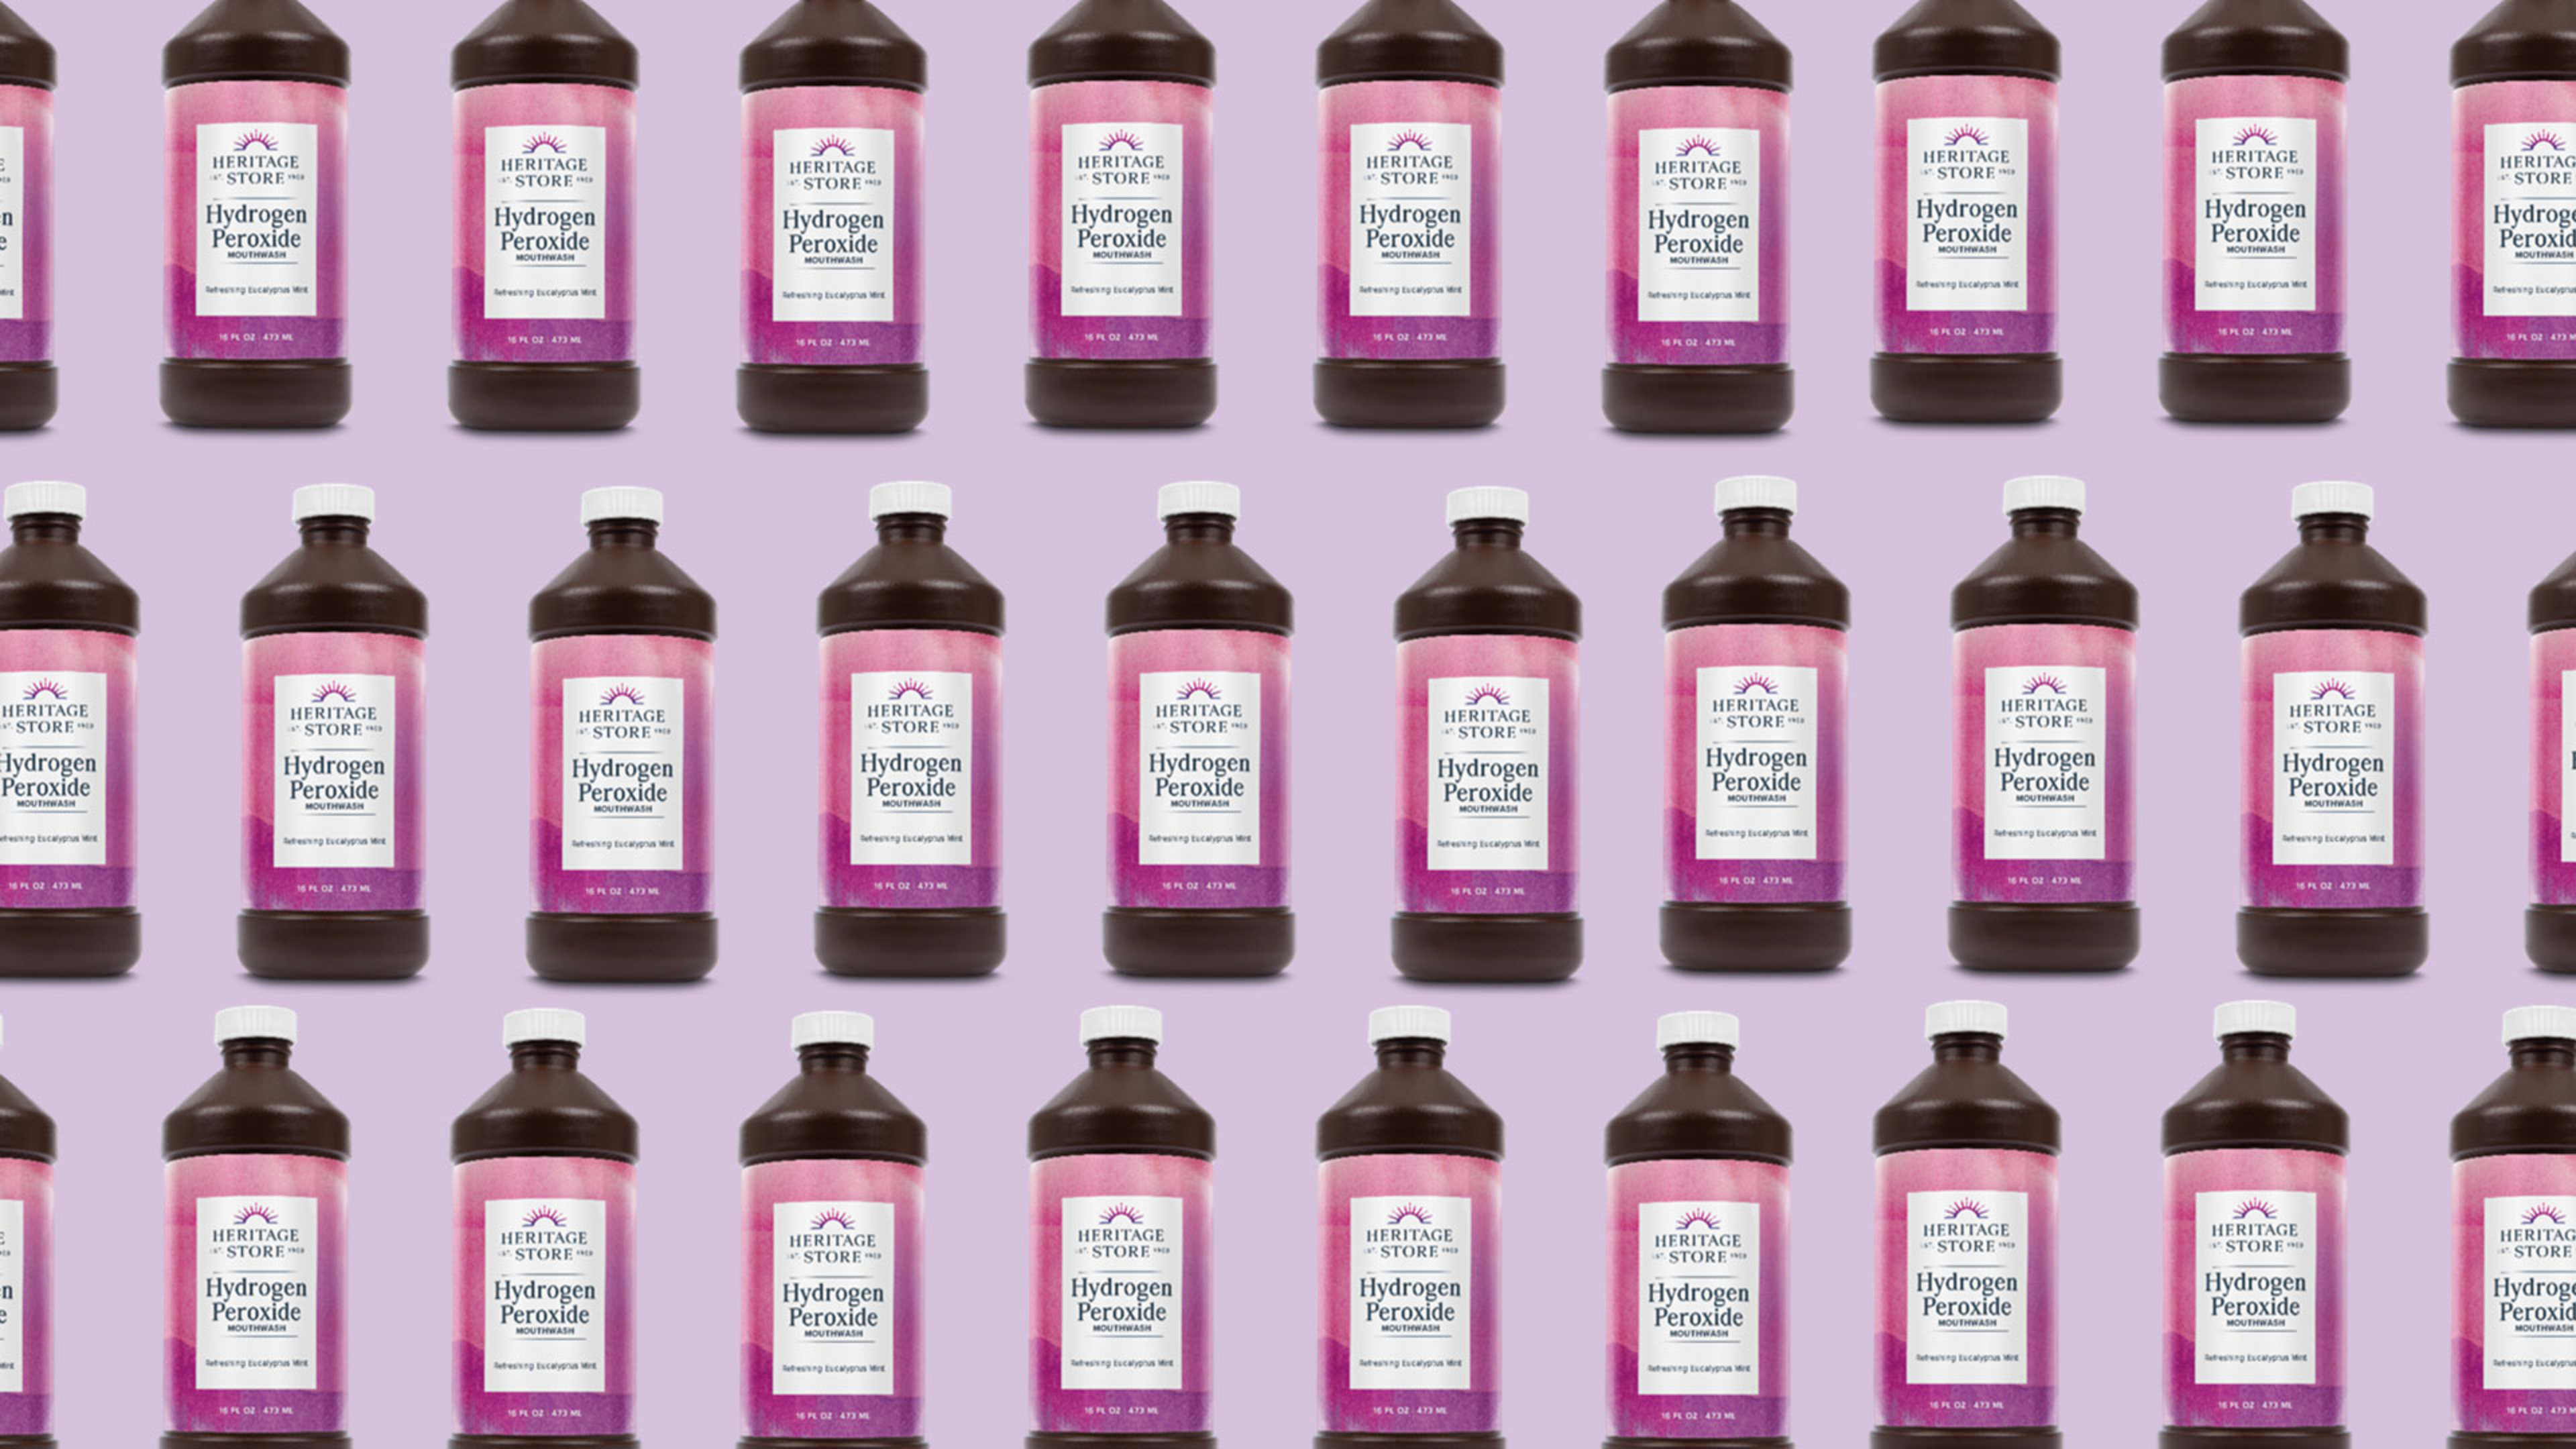 Mouthwash recall: Hydrogen peroxide products sold at Amazon and Whole Foods raise child poisoning fears